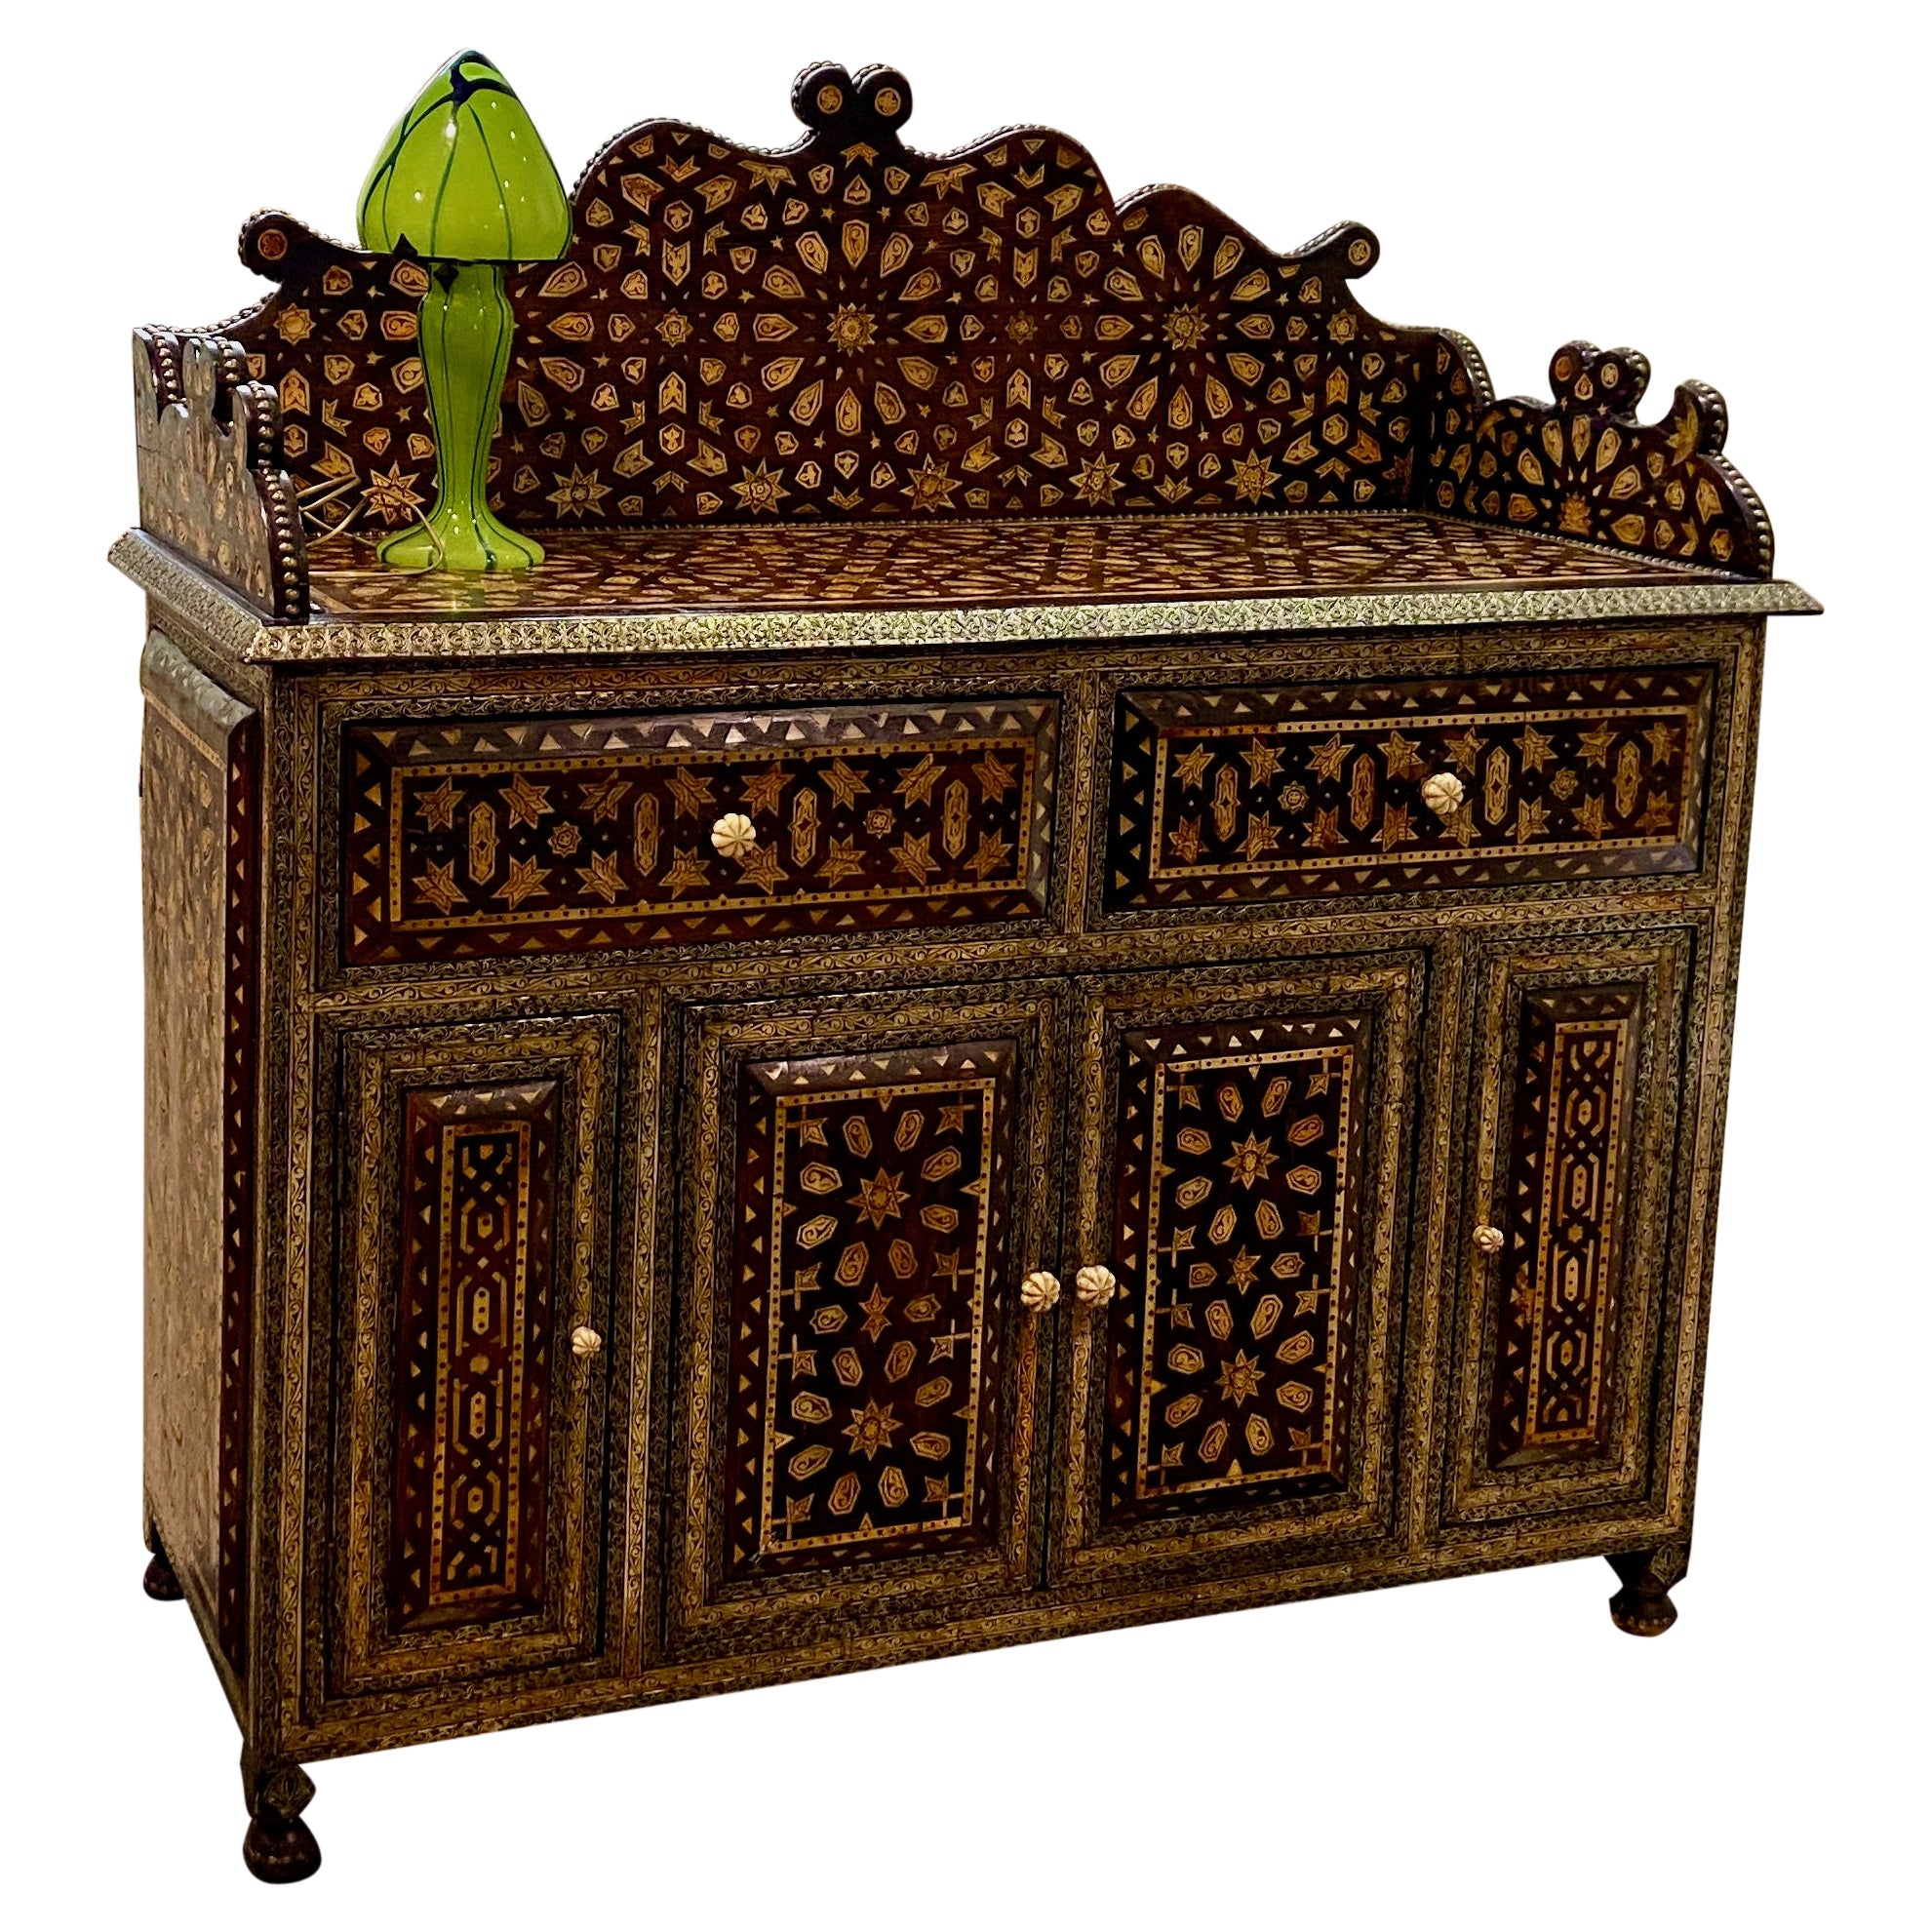 Rare and Exquisite Antique Syrian Credenza Cabinet Sideboard For Sale